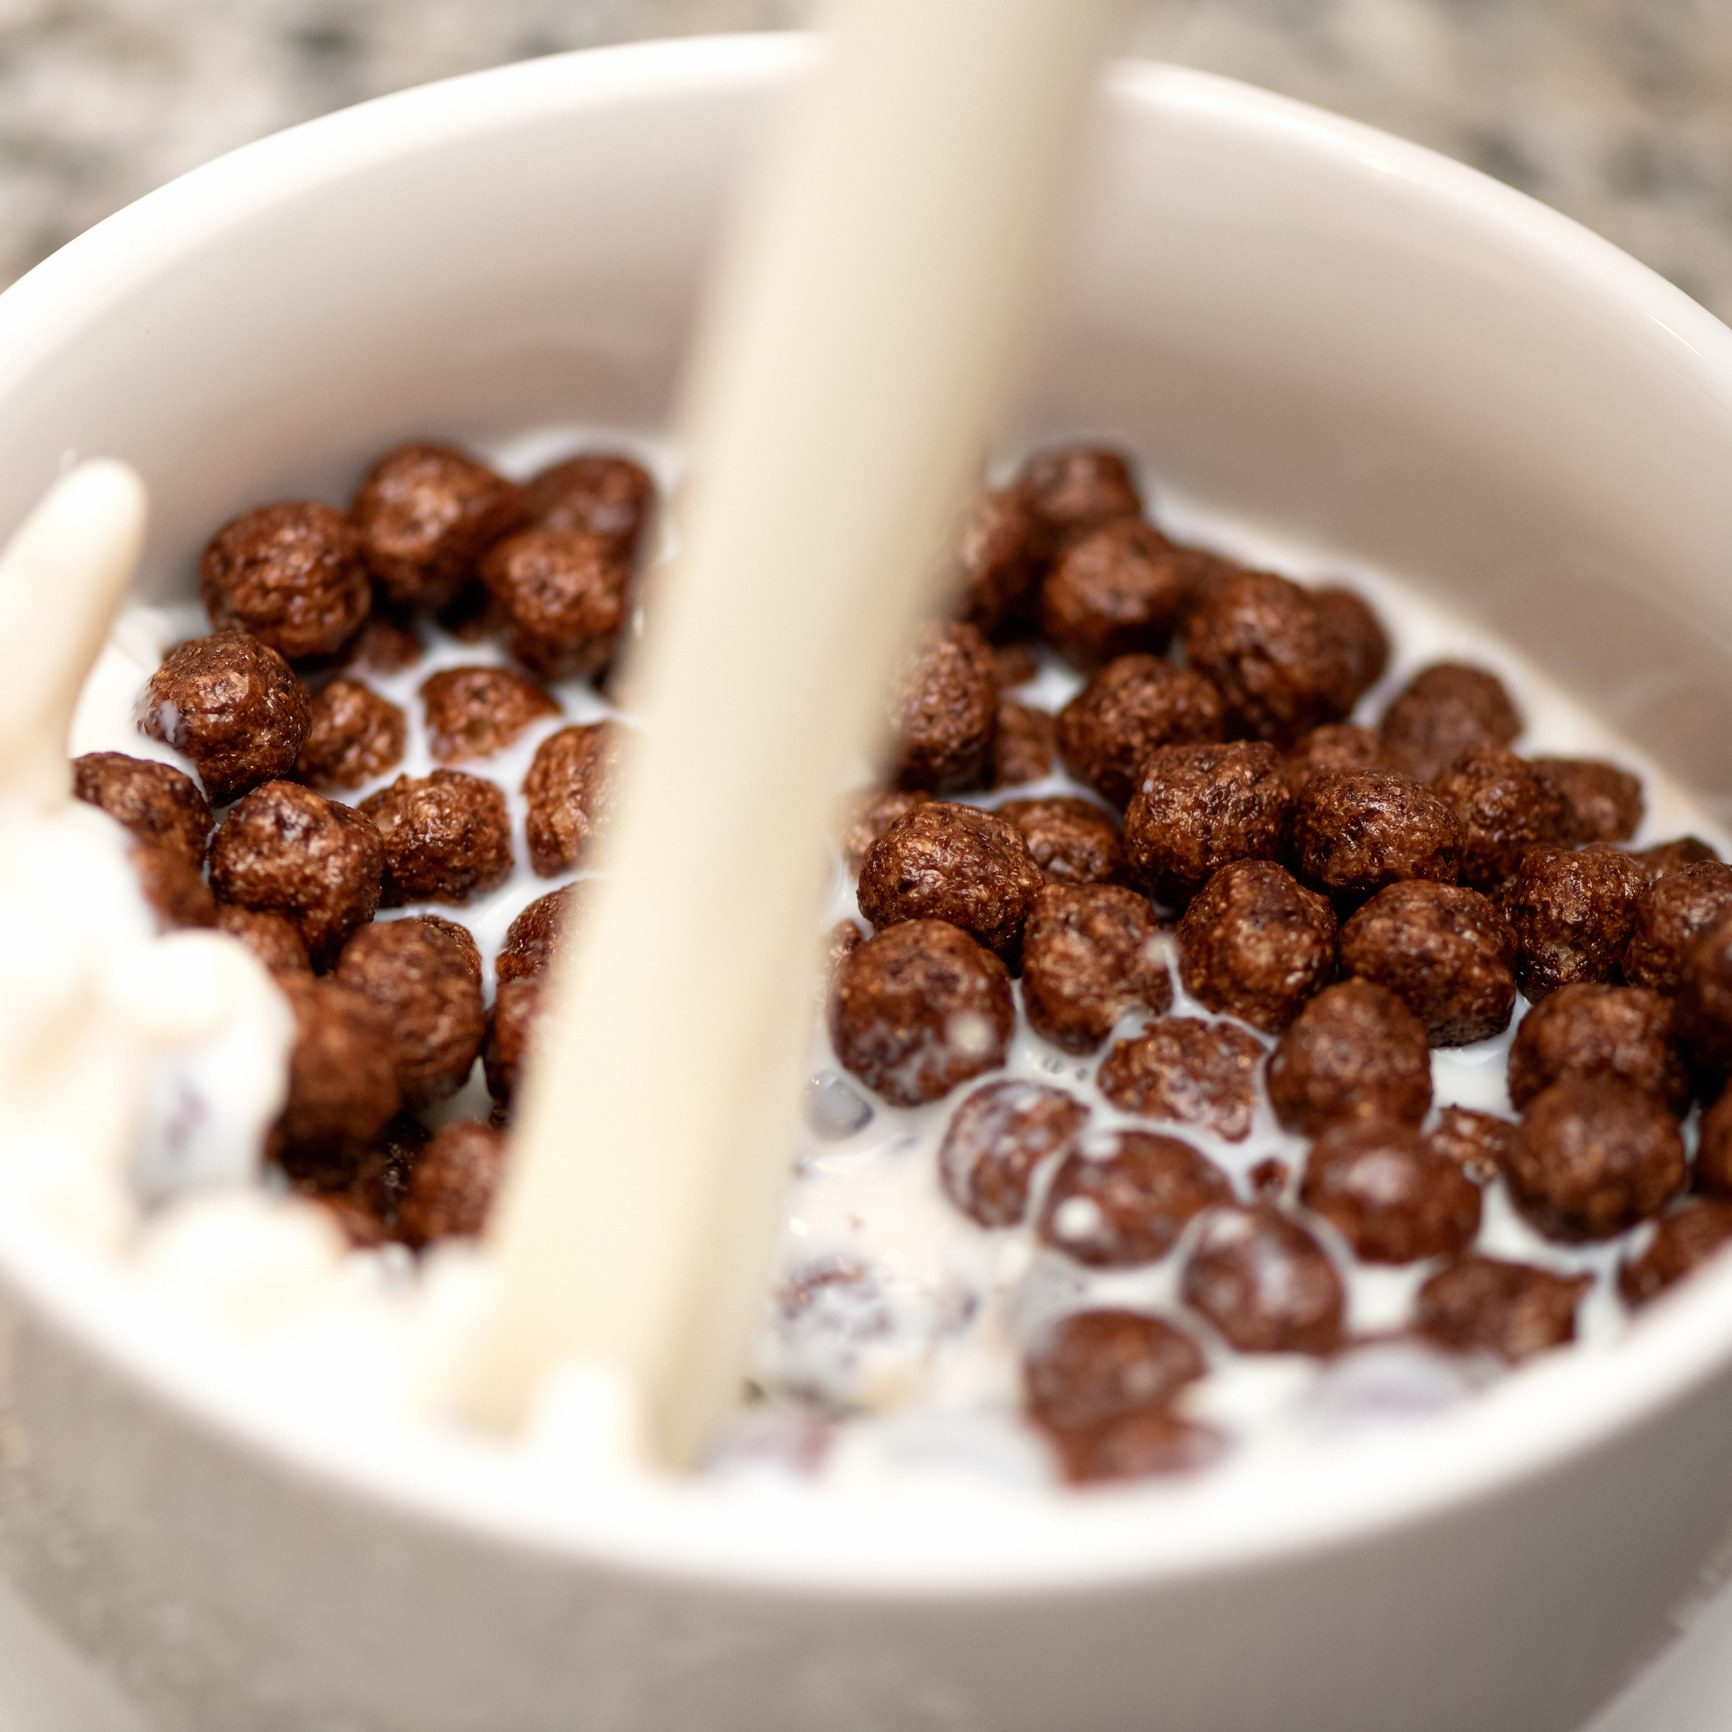 Pouring milk into a bowl of chocolate cereal.